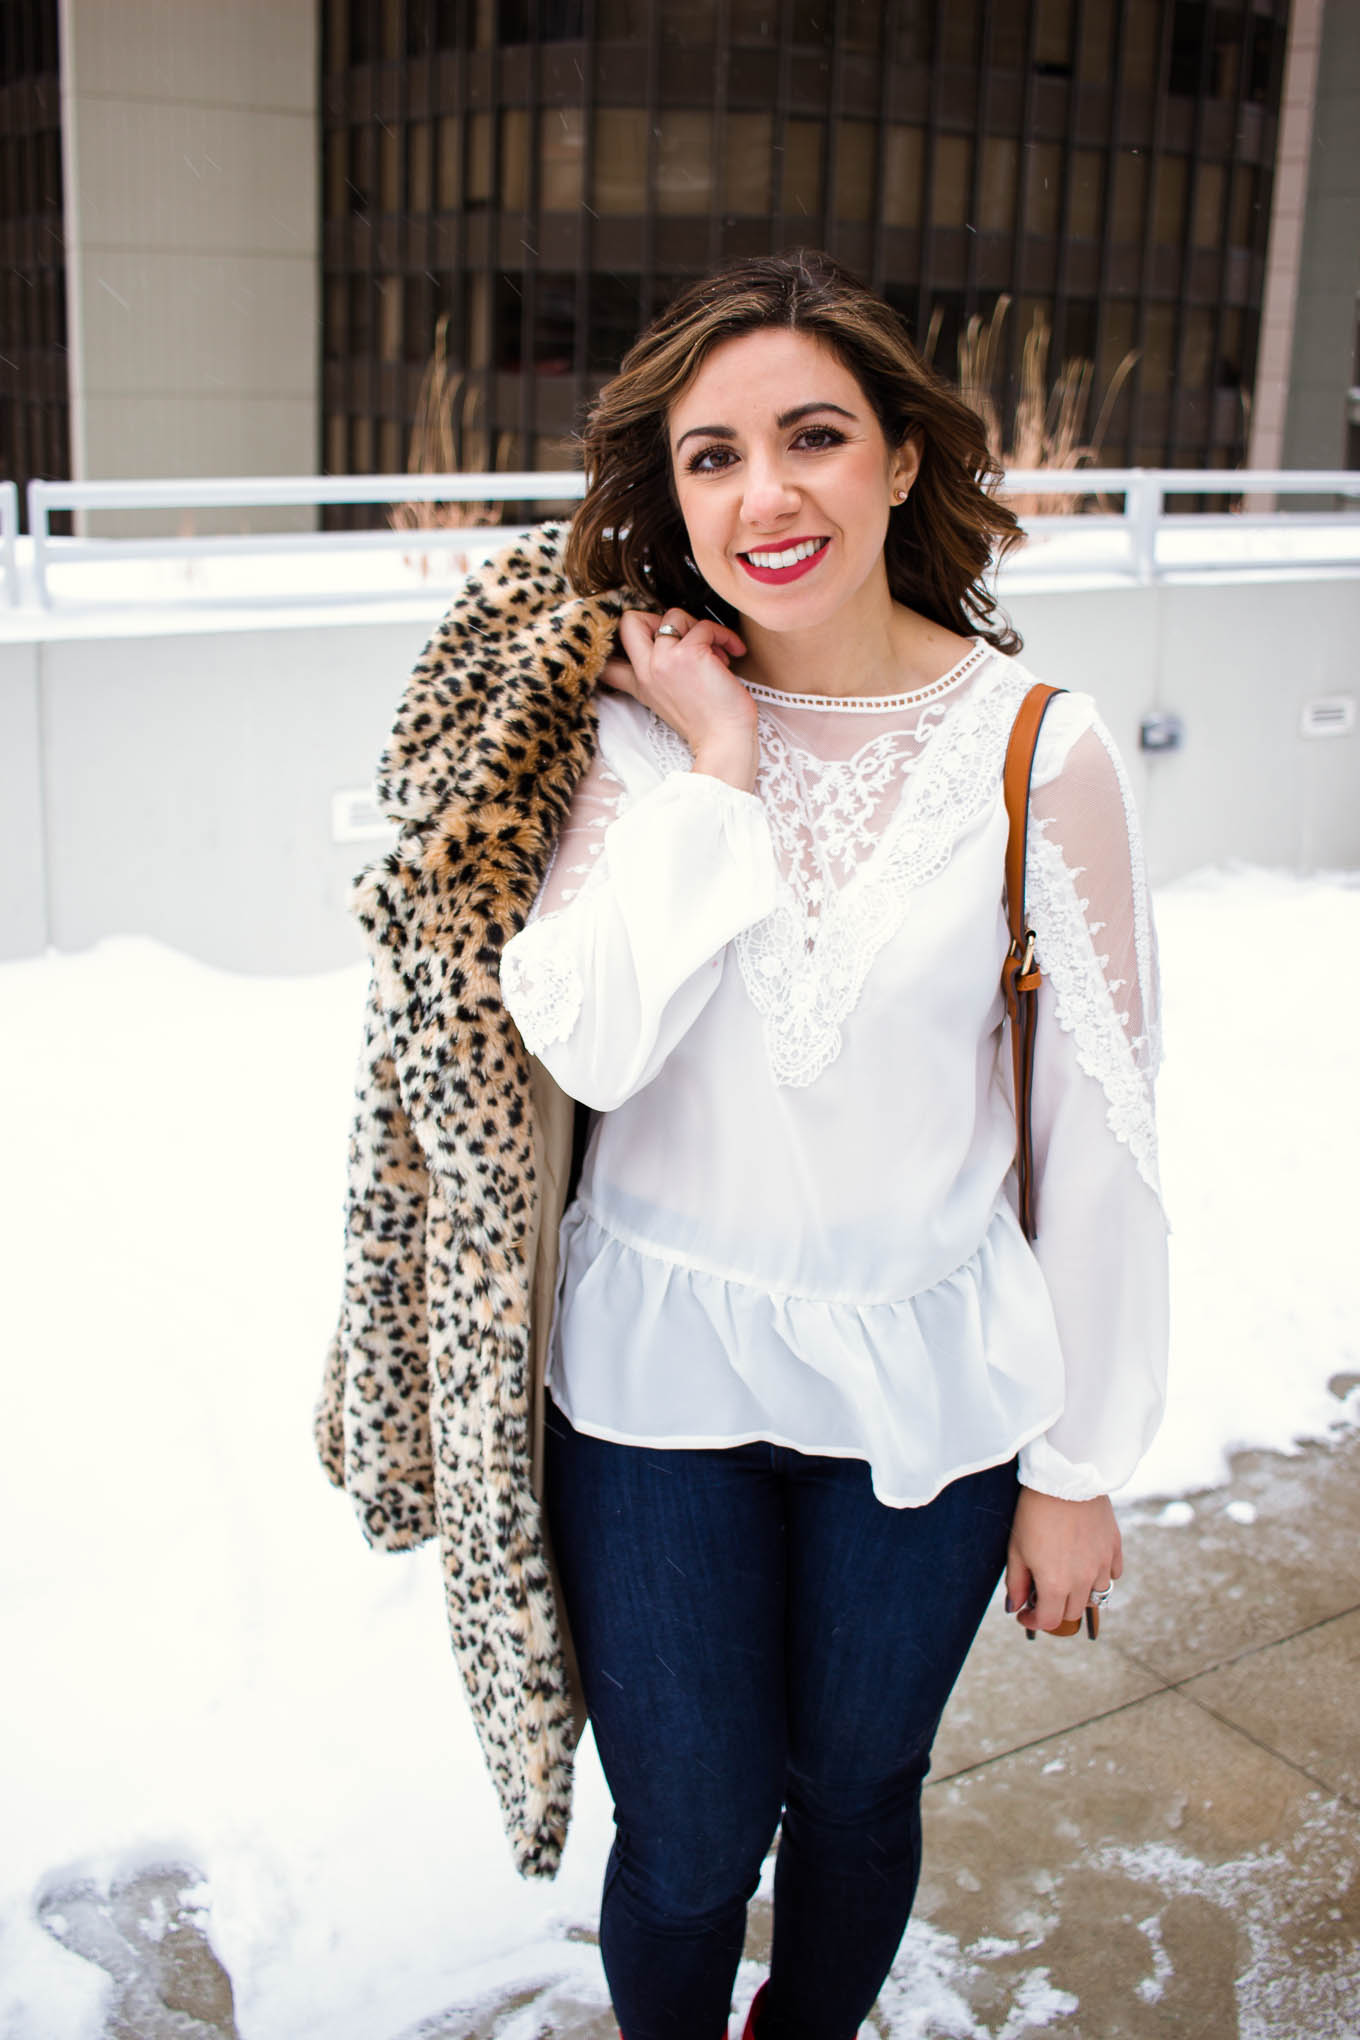 Lifestyle blogger Roxanne of Glass of Glam wearing a white lace Shein top, leopard coat, Mott and Bow denim, and red booties. - SheIn White Lace Top outfit by popular Chicago fashion blogger Glass of Glam